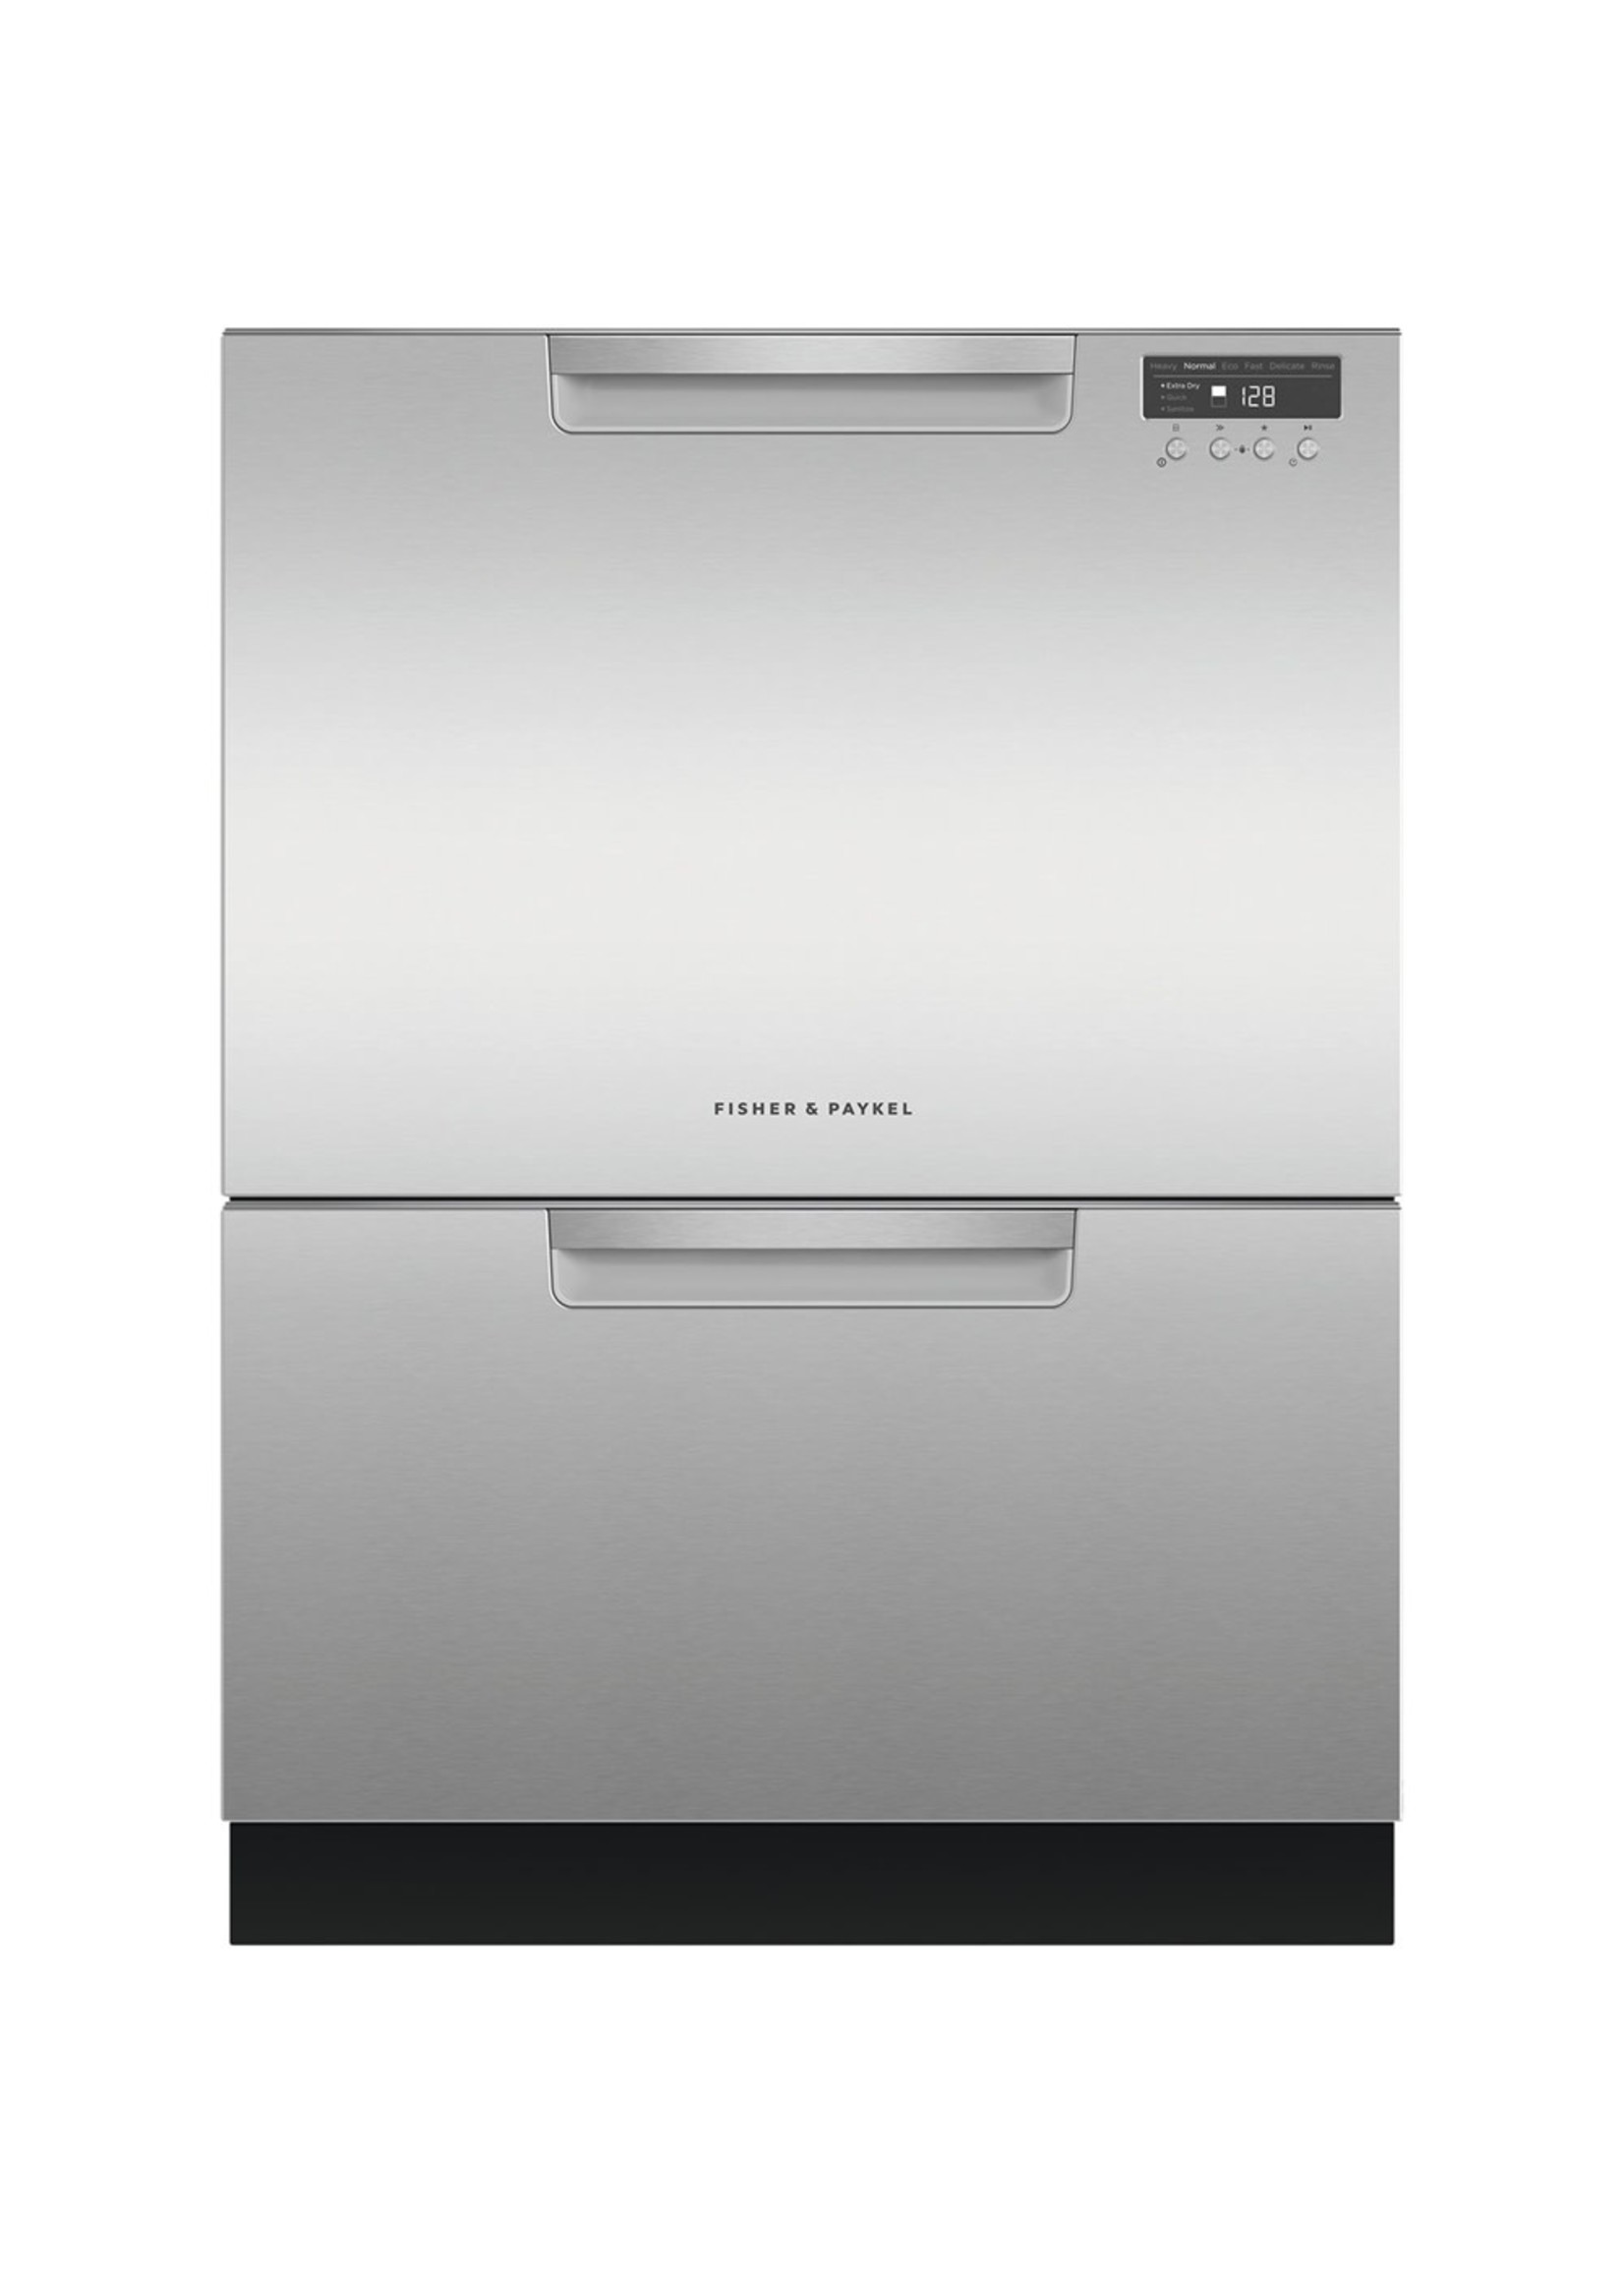 Fisher & Paykel - 24" Front Control Built-In Dishwasher - Stainless steel